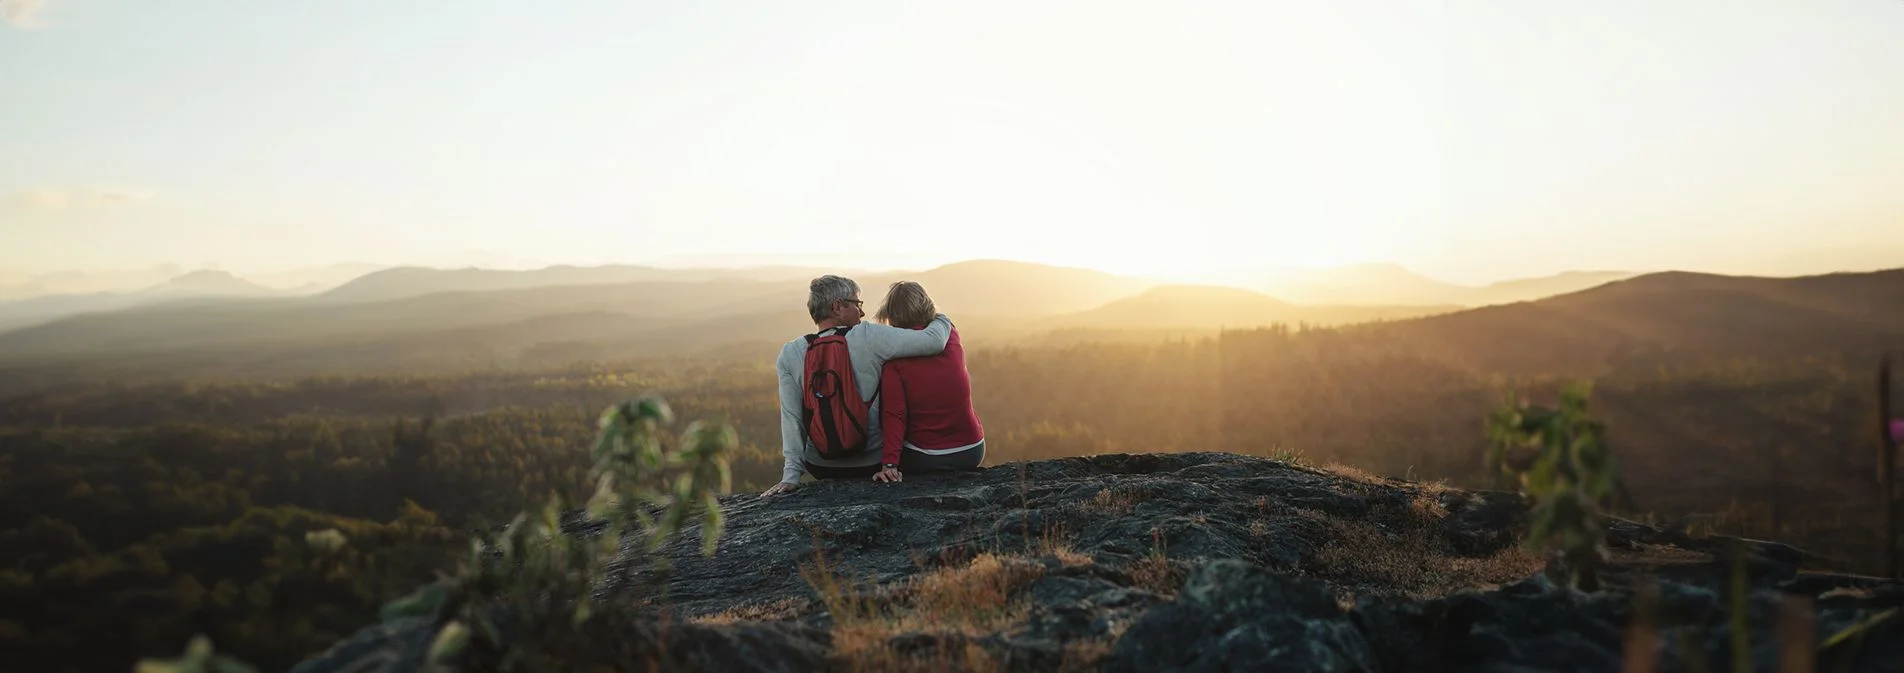 An active middle age couple sitting on a hiking trail watching a sunset together